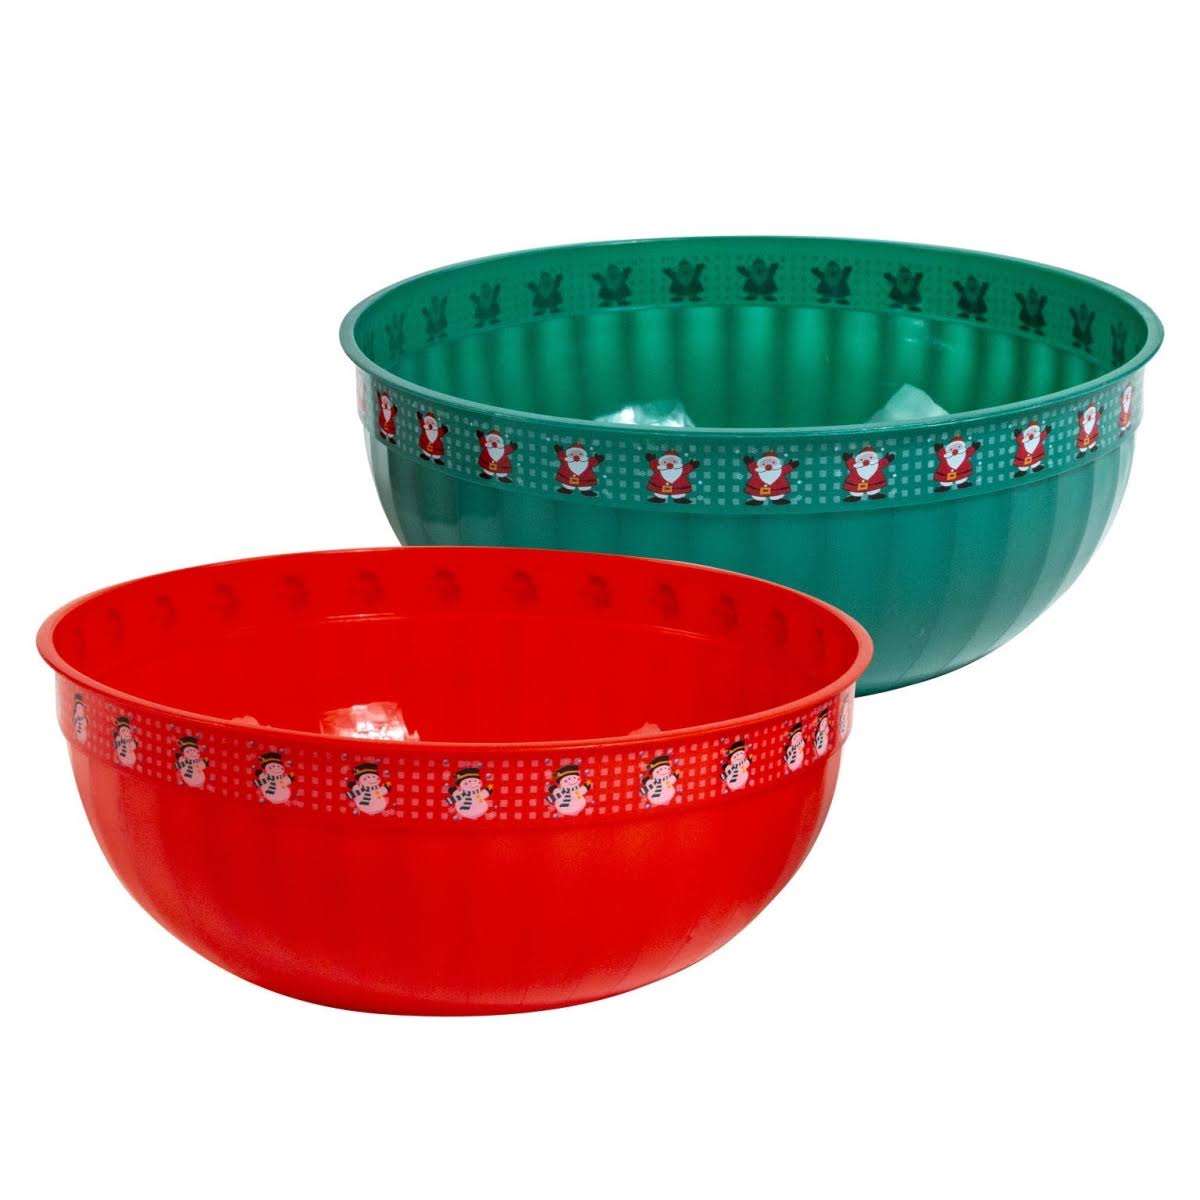 Ddi 2341970 12 in. Christmas Serving Bowl Red & Green - Case of 48